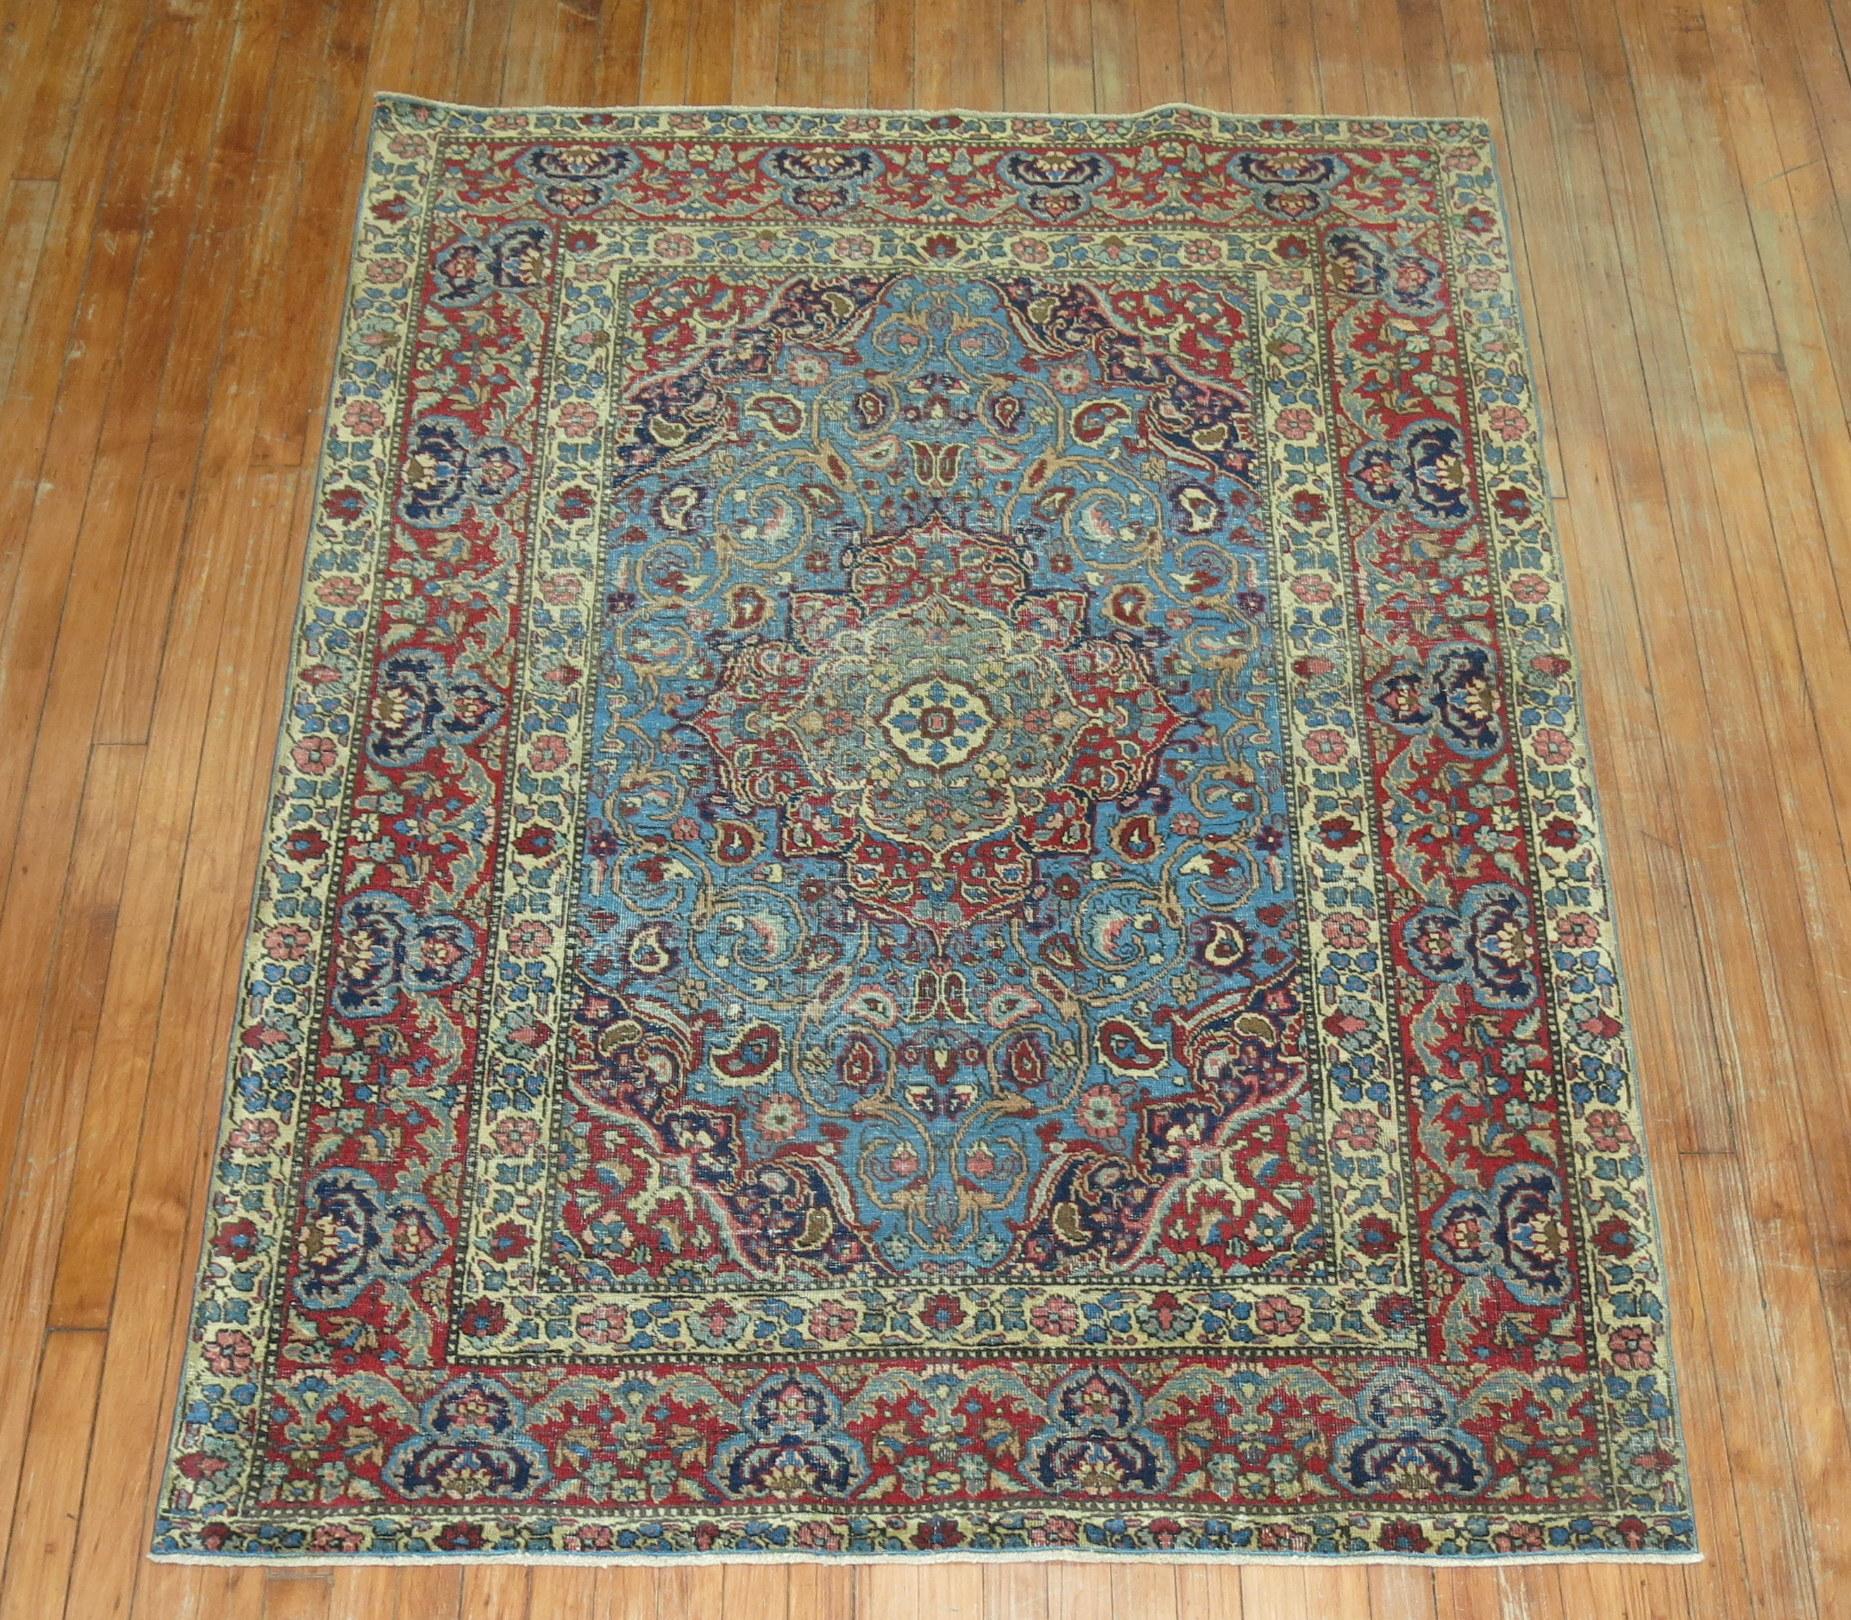 Vintage Persian formal Tabriz scatter rug in sky blue and red

4'7'' x 6'1''